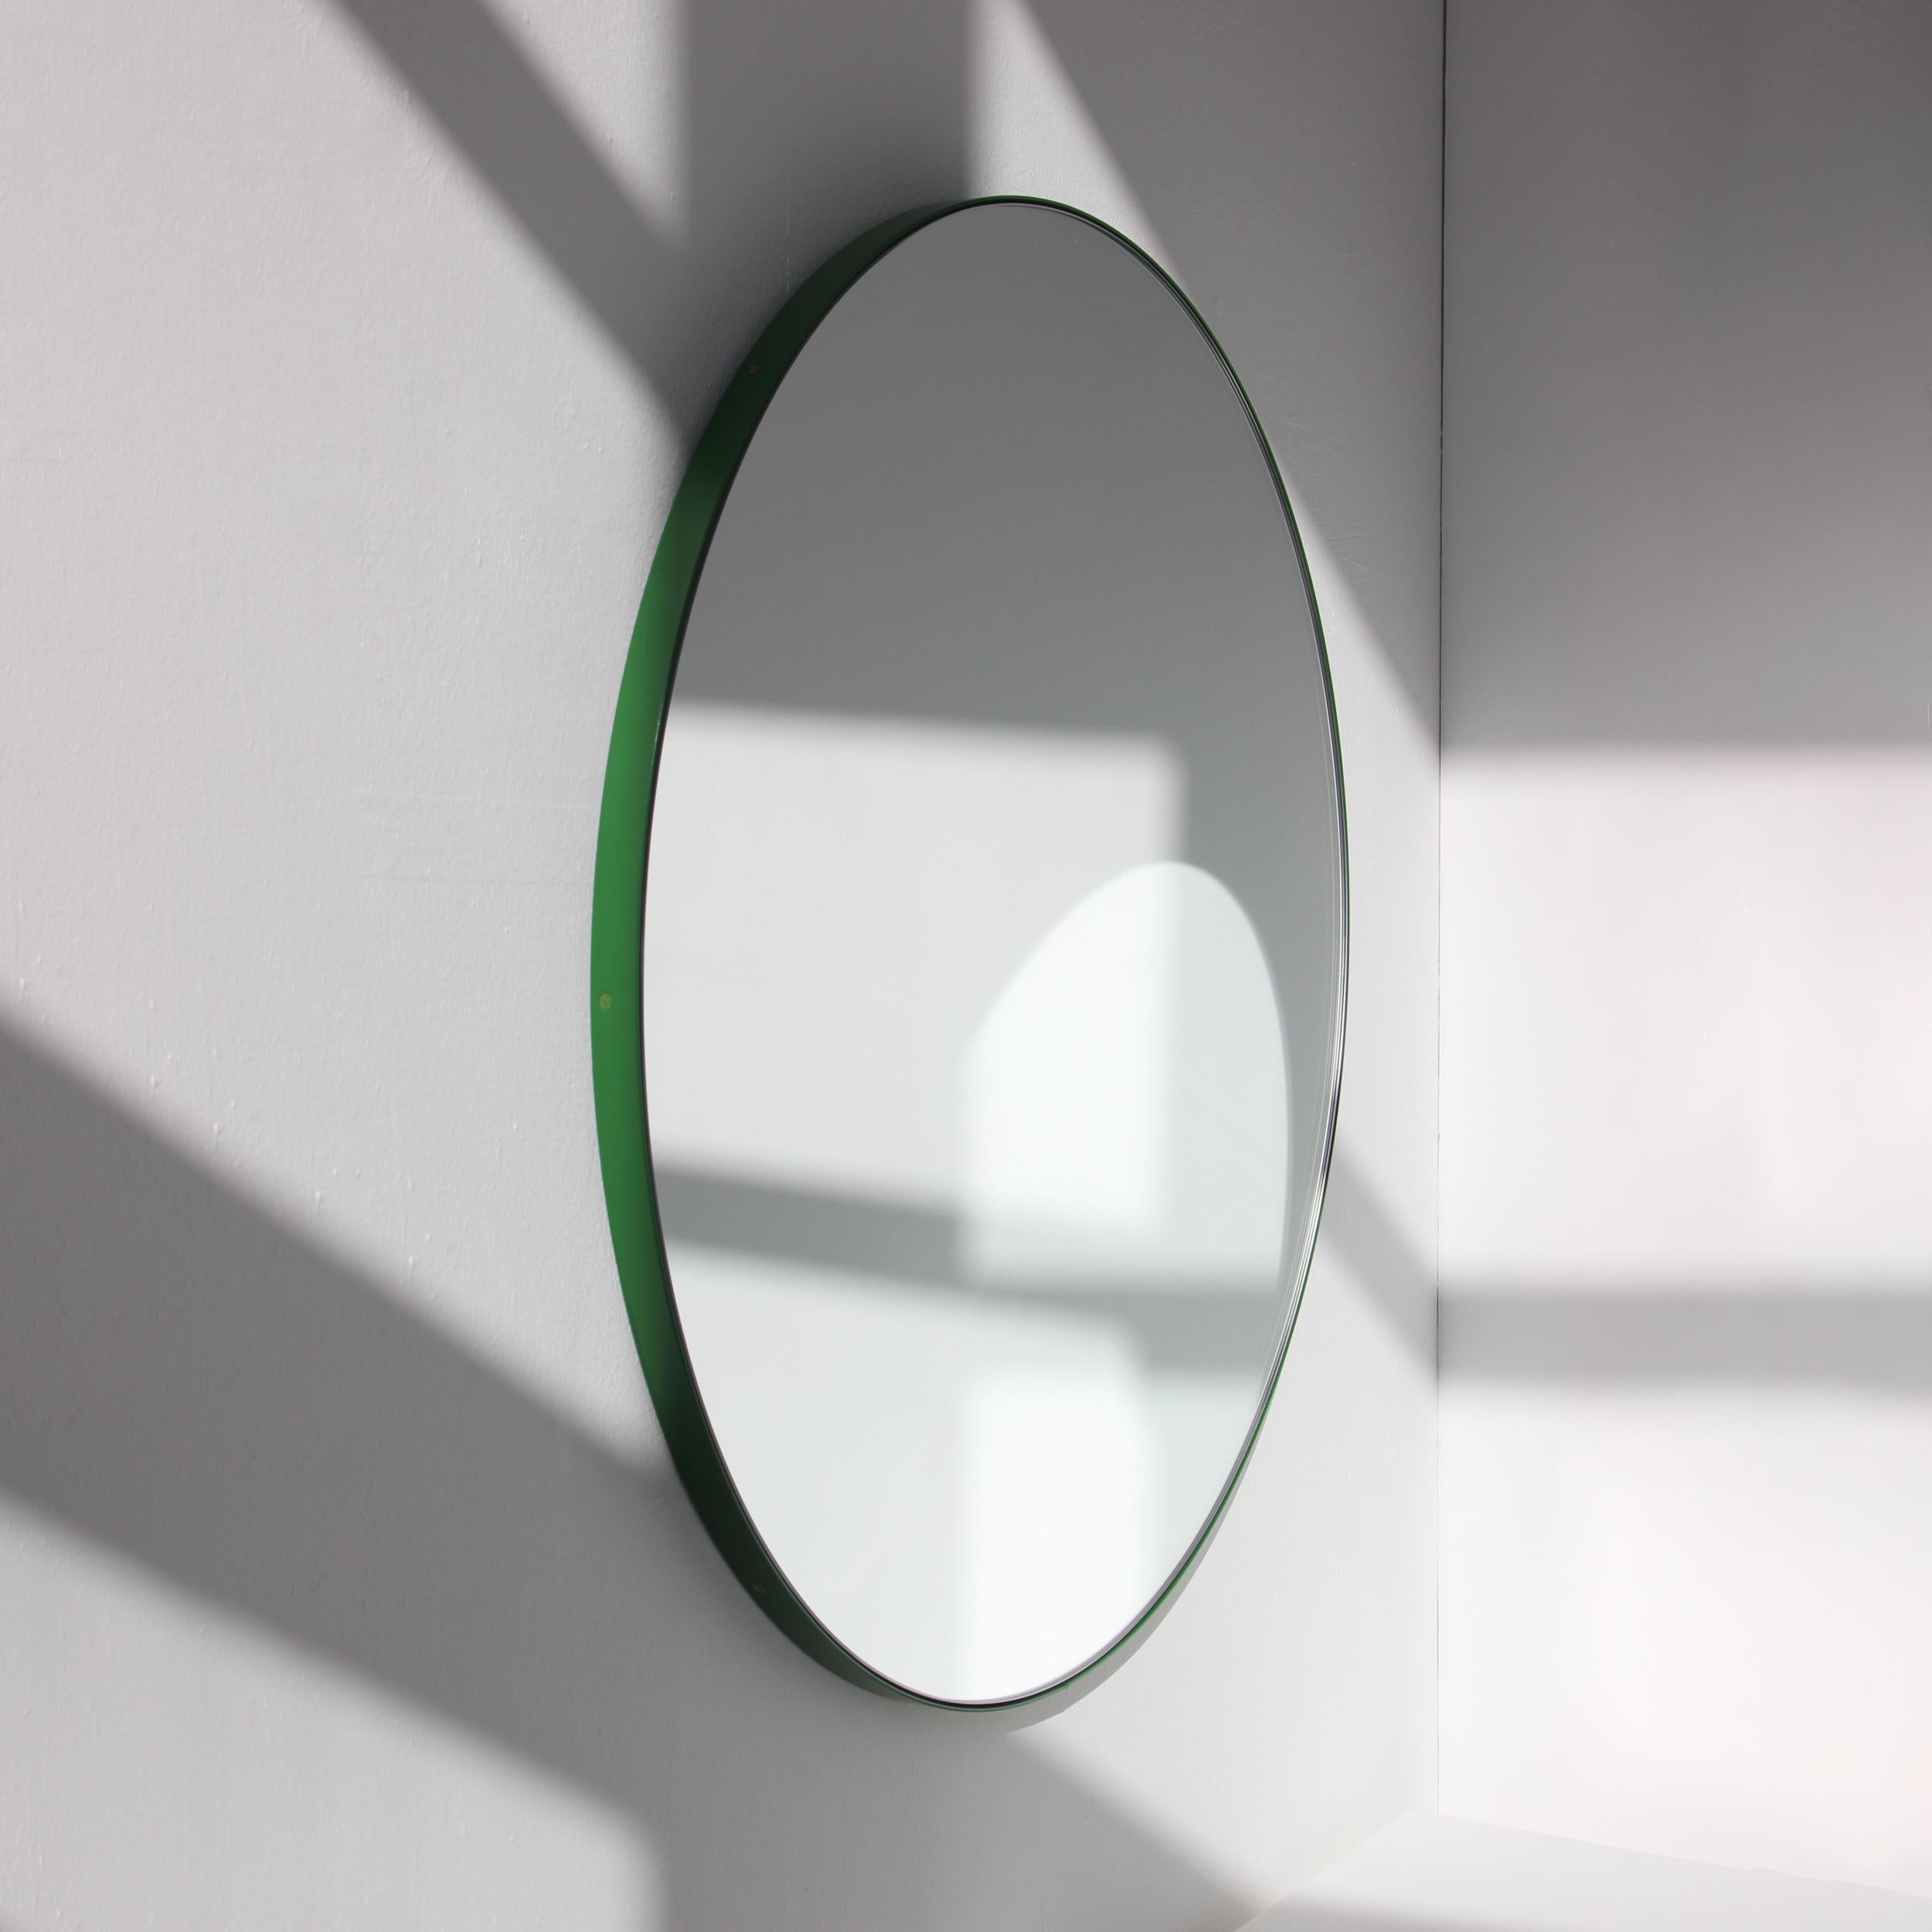 Minimalist round mirror with a lively aluminium powder coated green frame. Designed and handcrafted in London, UK.

Our mirrors are designed with an integrated French cleat (split batten) system that ensures the mirror is securely mounted flush with